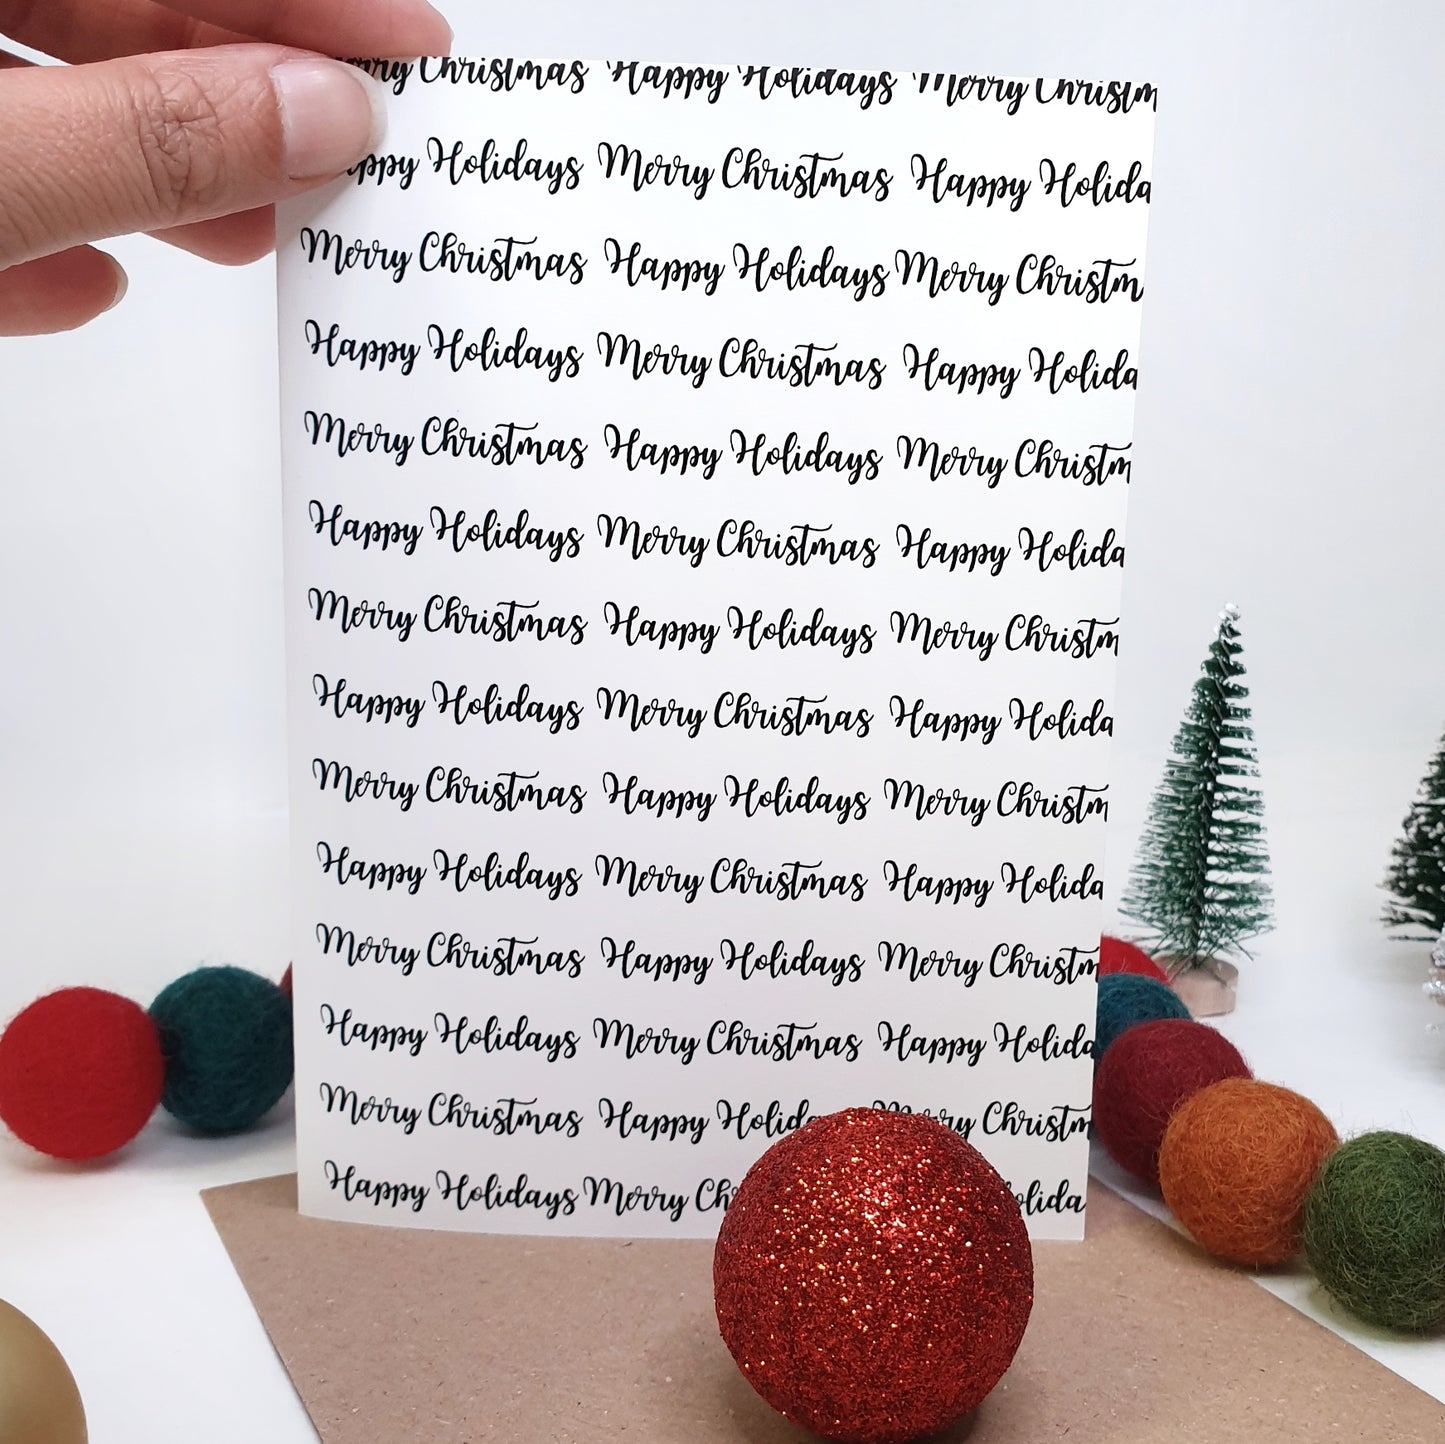 Merry Christmas Happy Holidays - A6 Monochrome Typo Greeting Card